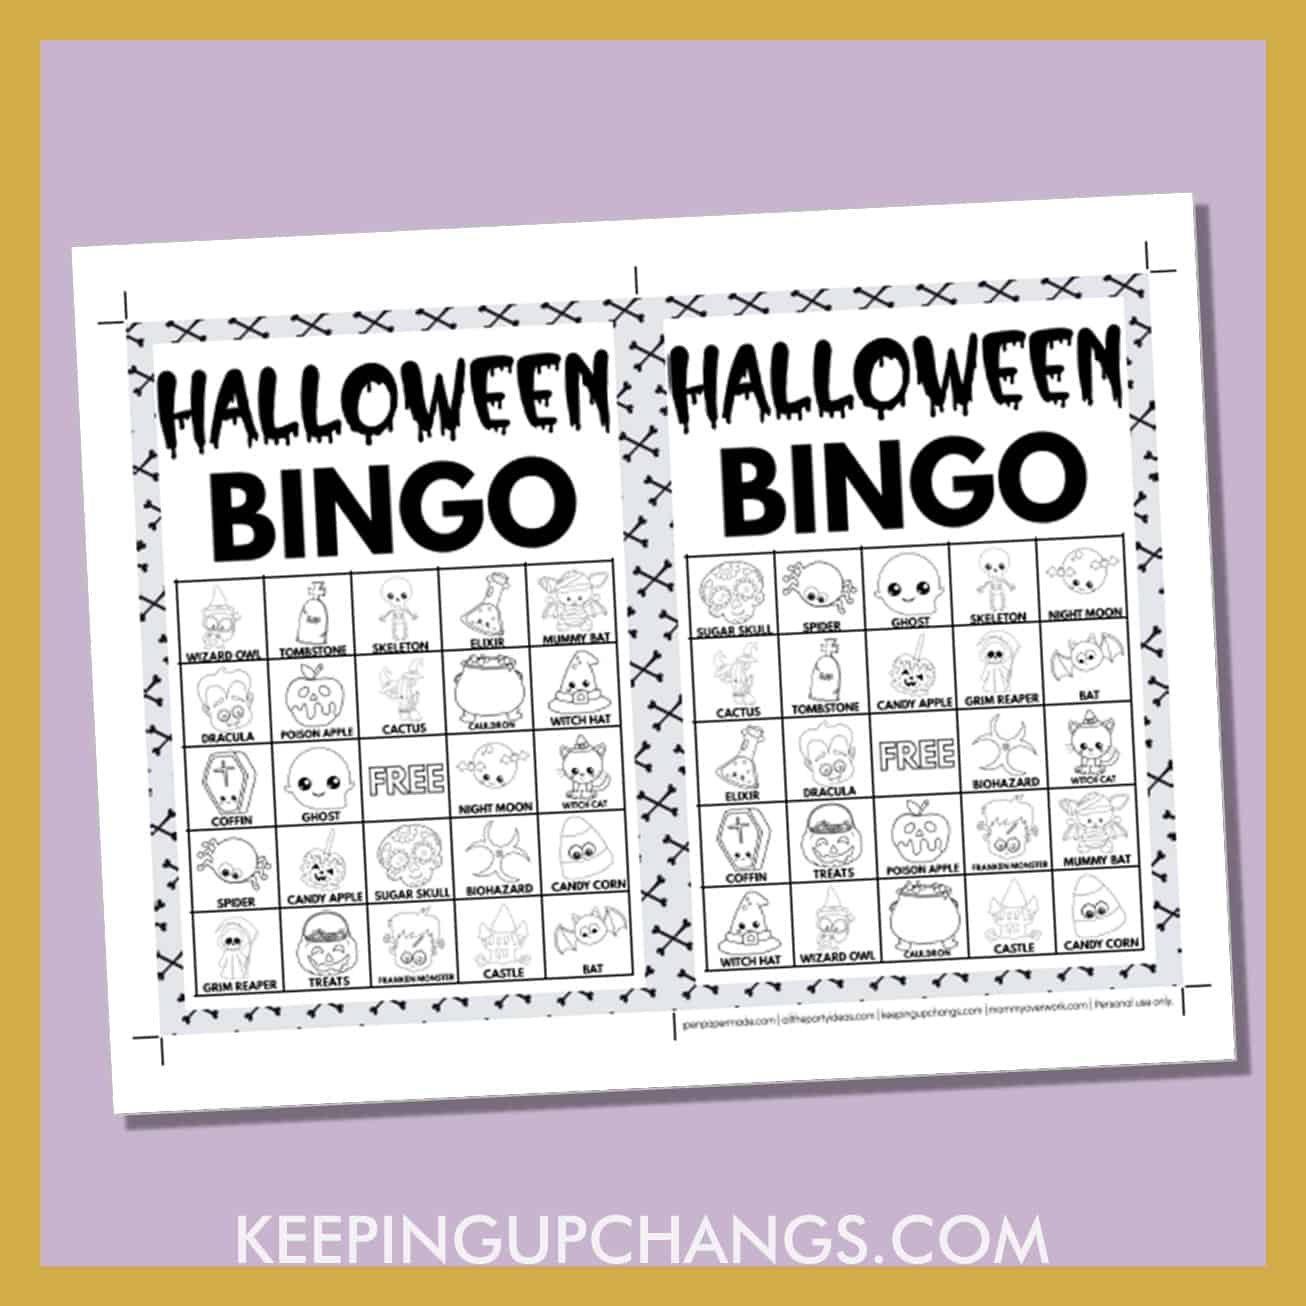 free fall halloween bingo card 5x5 5x7 black white coloring game boards with images and text words.